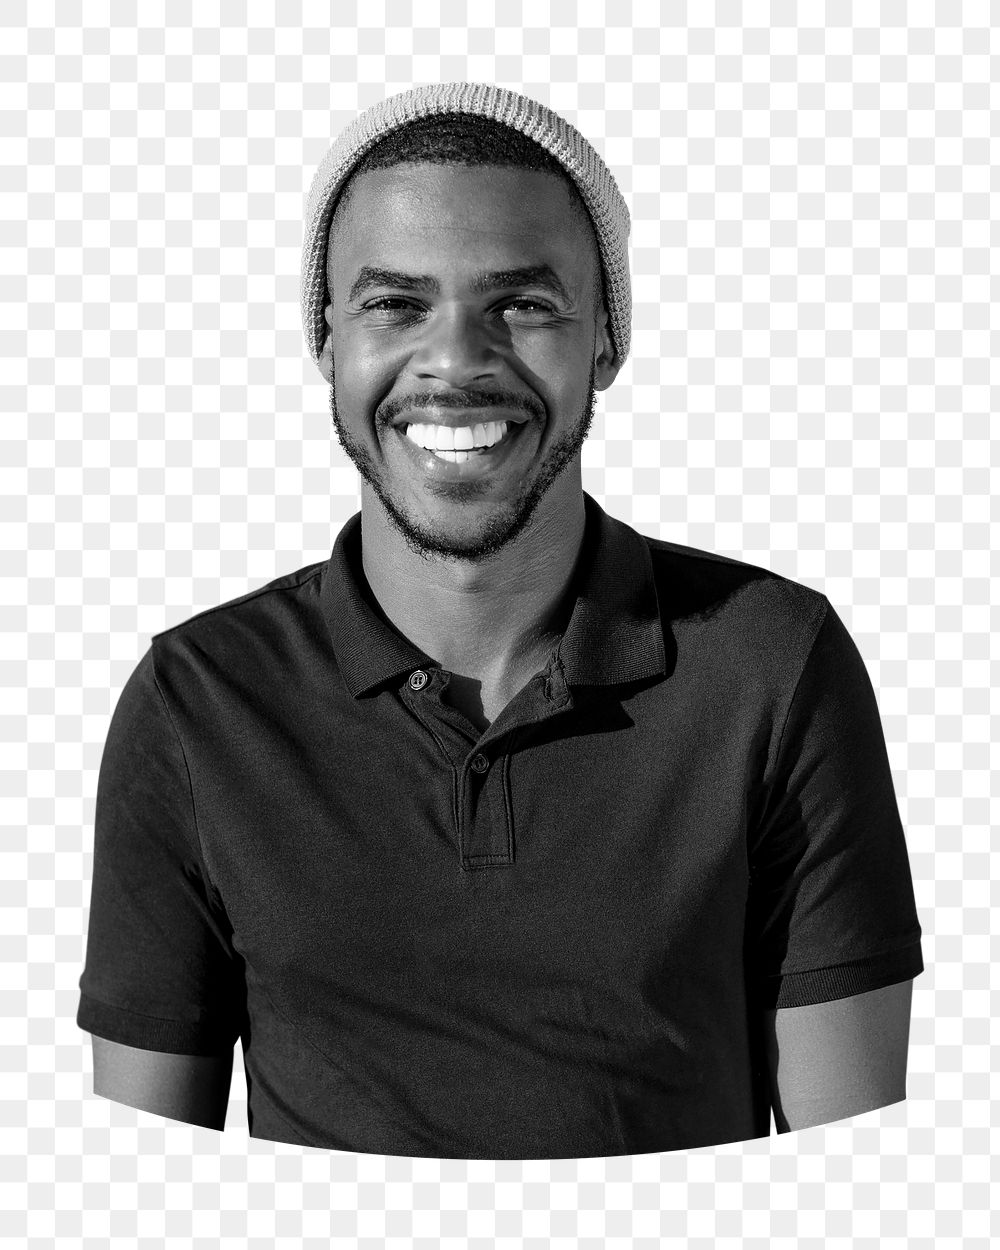 Happy young man png b&w element, transparent background